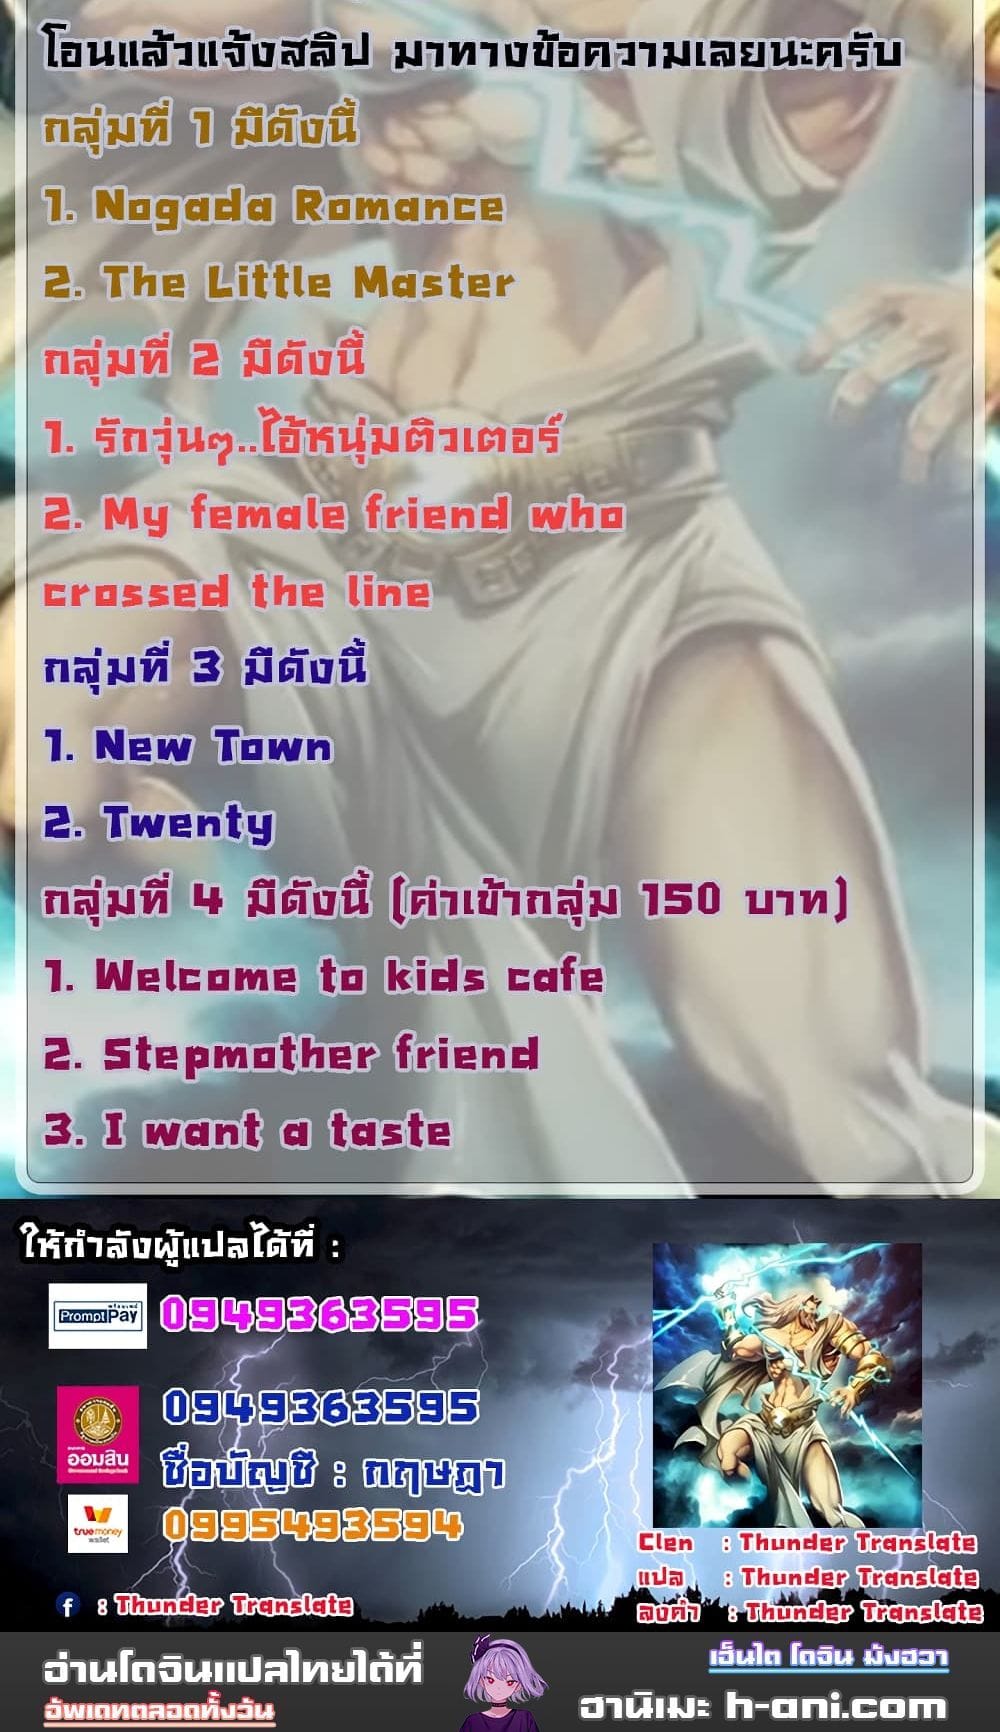 Welcome To Kids Cafe’ 55 ภาพ 10